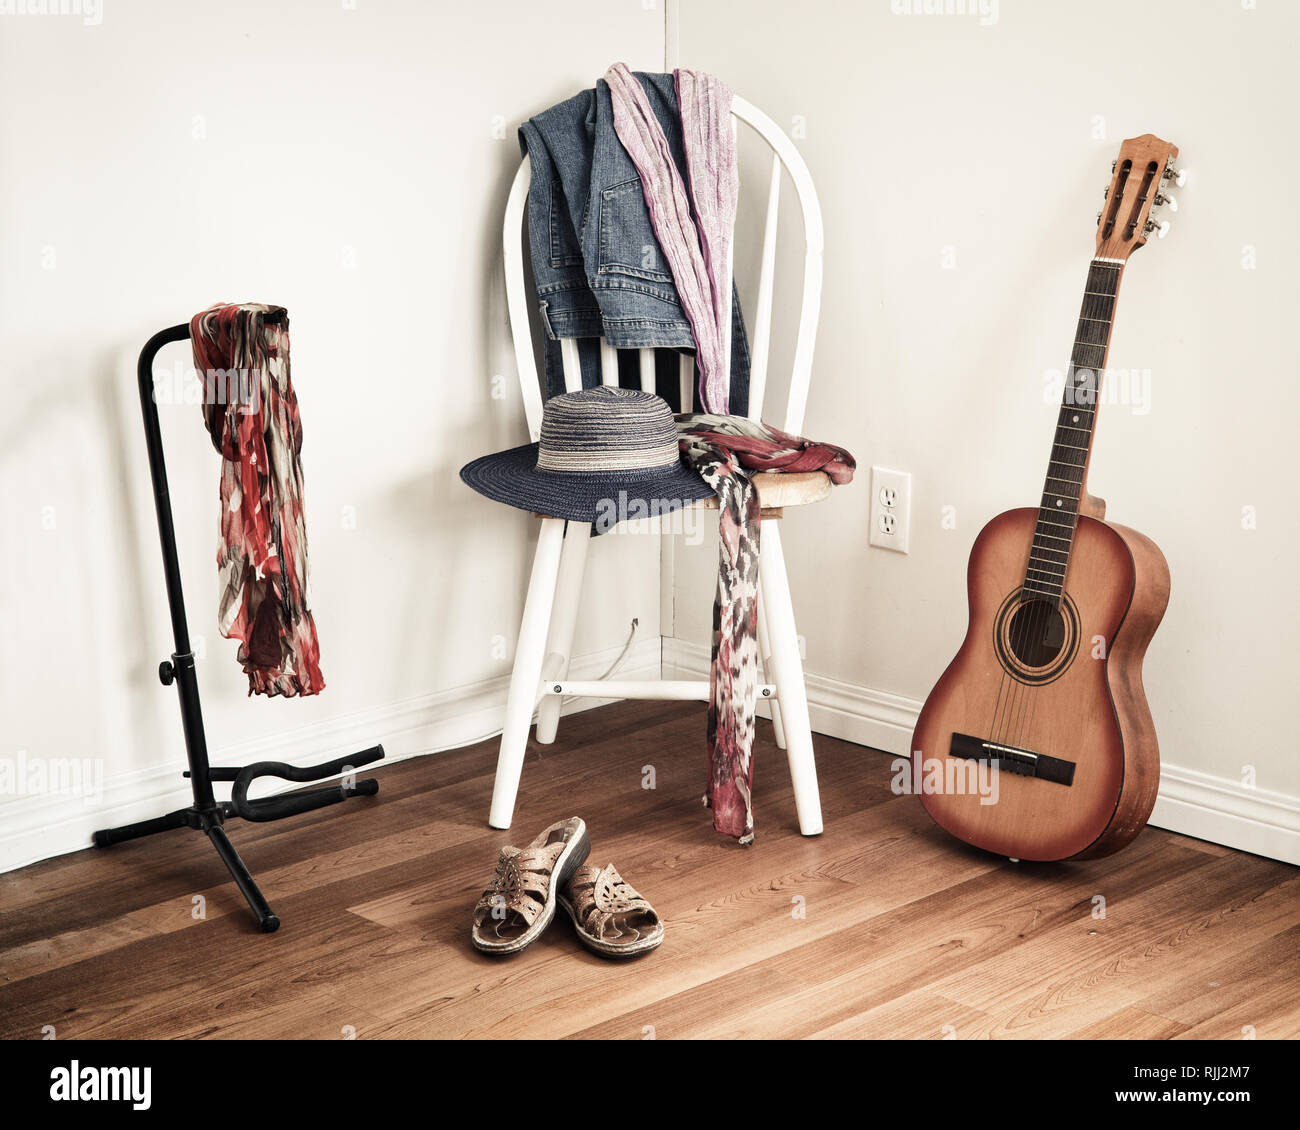 Women's casual clothing on chair in domestic setting with acoustic guitar leaning against wall. Stock Photo